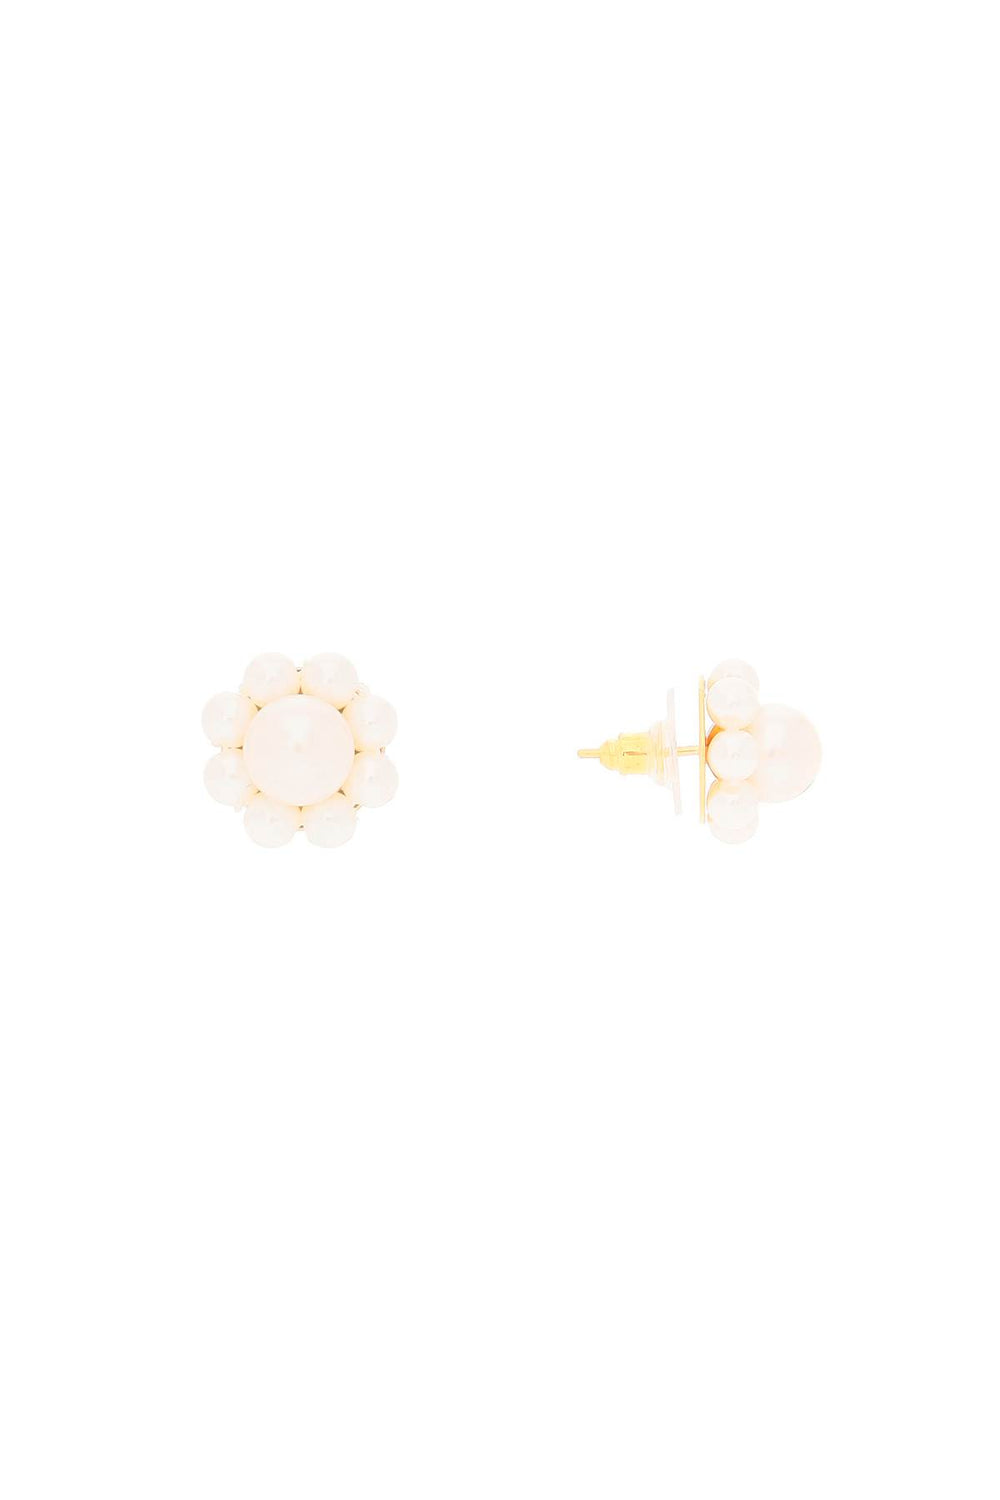 earrings with pearls-1